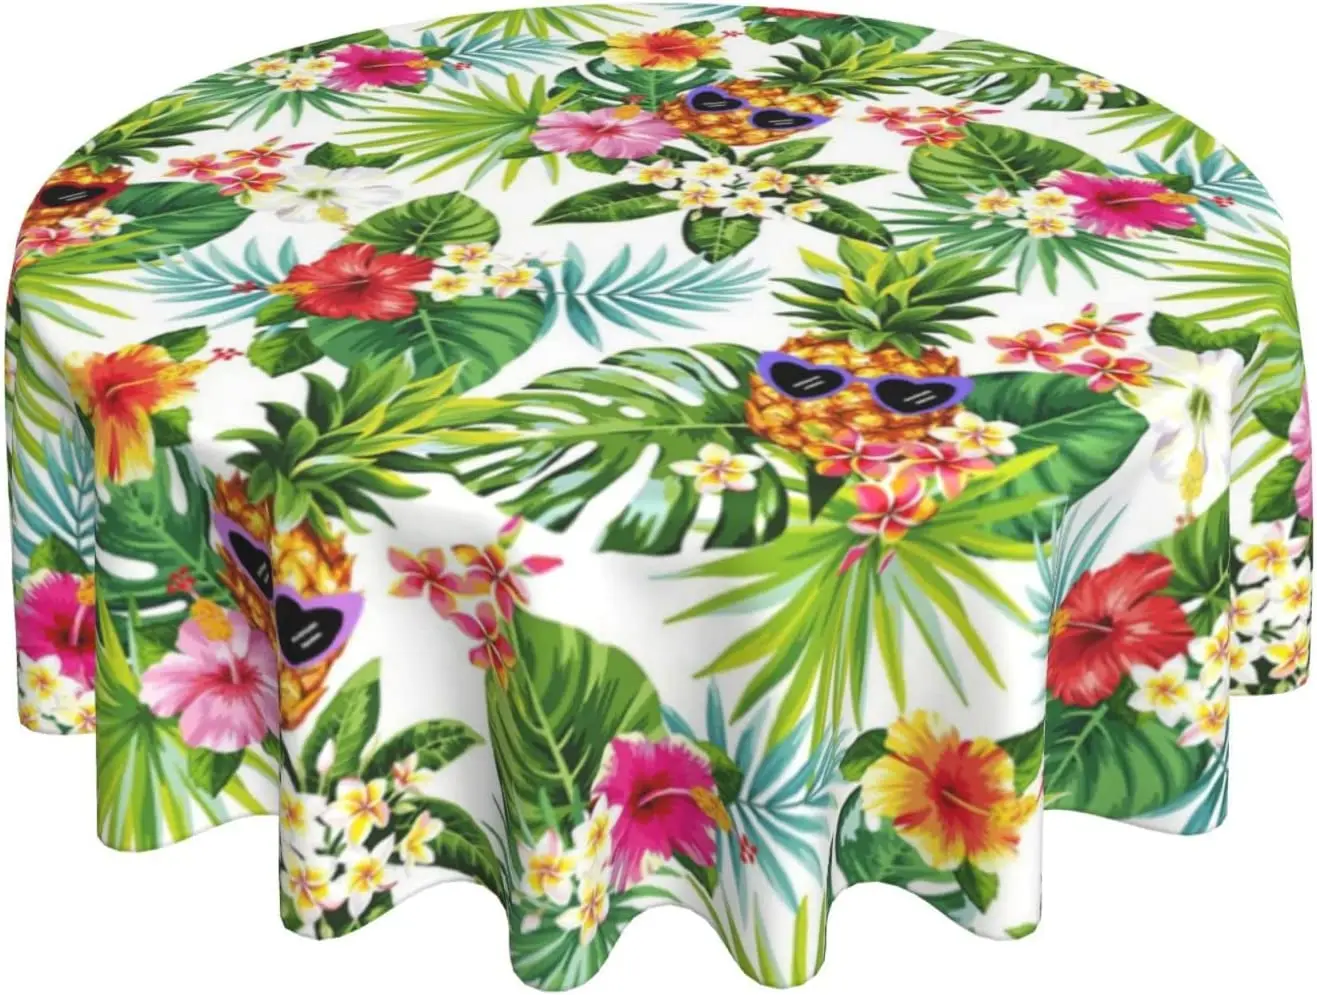 

Hawaiian Pineapple Tropical Round Tablecloth Palm Leaves Tablecloth Washable Reusable Table Cover for Home Party Picnic 60 Inch